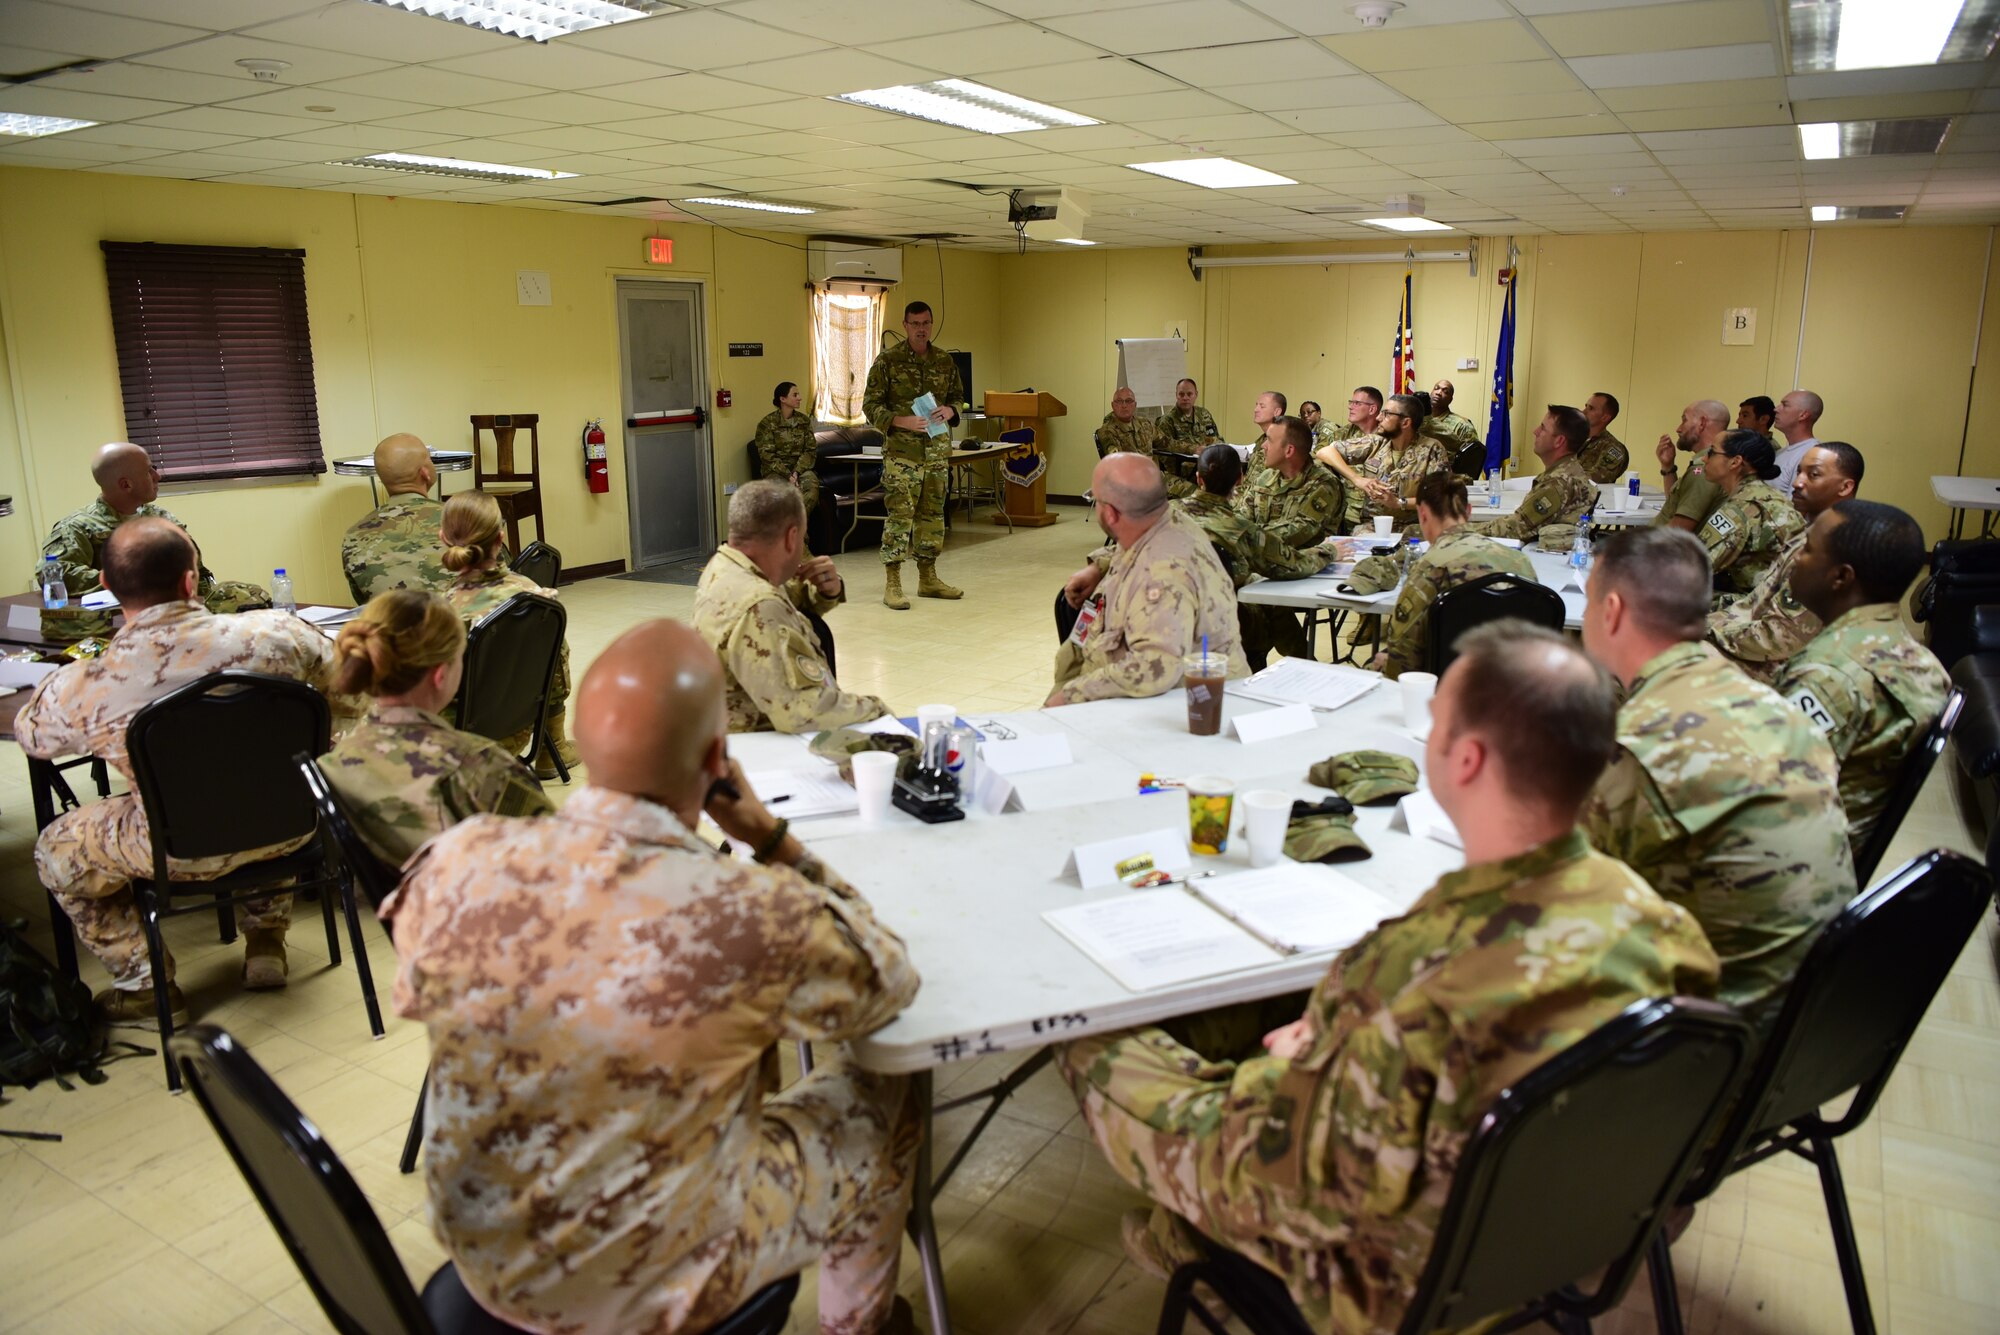 Chief Master Sgt. Chad Welch, 386th Air Expeditionary Wing command chief, speaks to students of the senior non-commissioned officer leadership course Nov. 2, 2018, at an undisclosed location in Southwest Asia. This marked the first time the SNCOLC was hosted in a deployed environment, and the first time it has ever been offered to coalition partners. (U.S. Air Force photo by Staff Sgt. Christopher Stoltz)